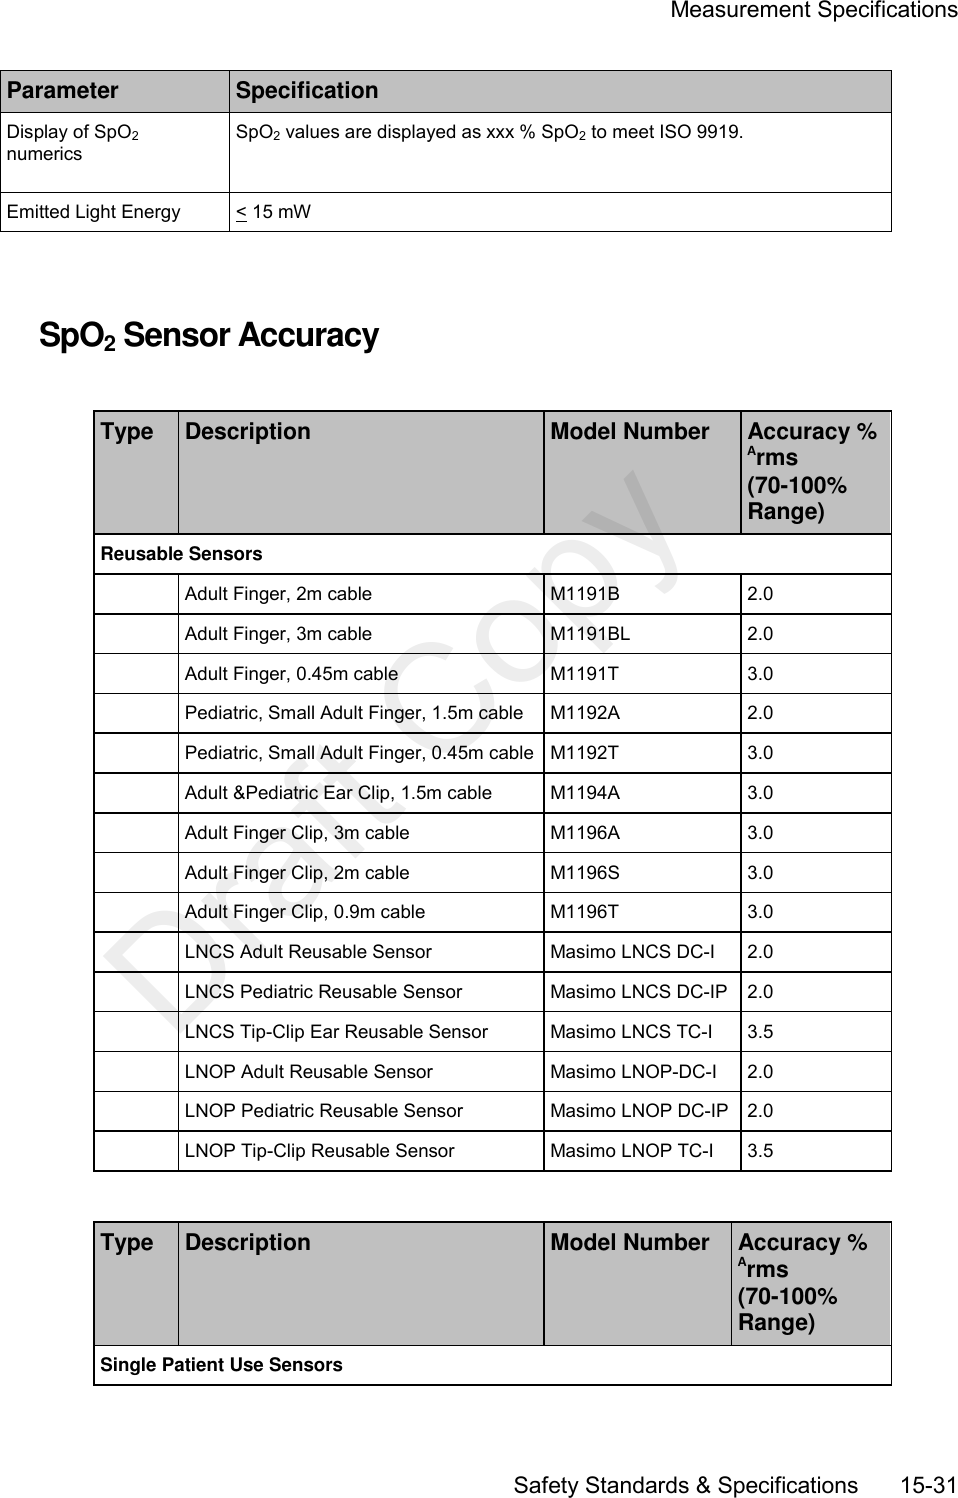     Measurement Specifications       Safety Standards &amp; Specifications     15-31 Parameter Specification Display of SpO2 numerics SpO2 values are displayed as xxx % SpO2 to meet ISO 9919. Emitted Light Energy &lt; 15 mW   SpO2 Sensor Accuracy  Type Description Model Number Accuracy % Arms (70-100% Range) Reusable Sensors  Adult Finger, 2m cable M1191B 2.0  Adult Finger, 3m cable M1191BL 2.0  Adult Finger, 0.45m cable M1191T 3.0  Pediatric, Small Adult Finger, 1.5m cable M1192A 2.0  Pediatric, Small Adult Finger, 0.45m cable M1192T 3.0  Adult &amp;Pediatric Ear Clip, 1.5m cable M1194A 3.0  Adult Finger Clip, 3m cable M1196A 3.0  Adult Finger Clip, 2m cable M1196S 3.0  Adult Finger Clip, 0.9m cable M1196T 3.0  LNCS Adult Reusable Sensor Masimo LNCS DC-I 2.0  LNCS Pediatric Reusable Sensor Masimo LNCS DC-IP 2.0  LNCS Tip-Clip Ear Reusable Sensor Masimo LNCS TC-I 3.5  LNOP Adult Reusable Sensor Masimo LNOP-DC-I 2.0  LNOP Pediatric Reusable Sensor Masimo LNOP DC-IP 2.0  LNOP Tip-Clip Reusable Sensor Masimo LNOP TC-I 3.5  Type Description Model Number Accuracy % Arms (70-100% Range) Single Patient Use Sensors Draft Copy